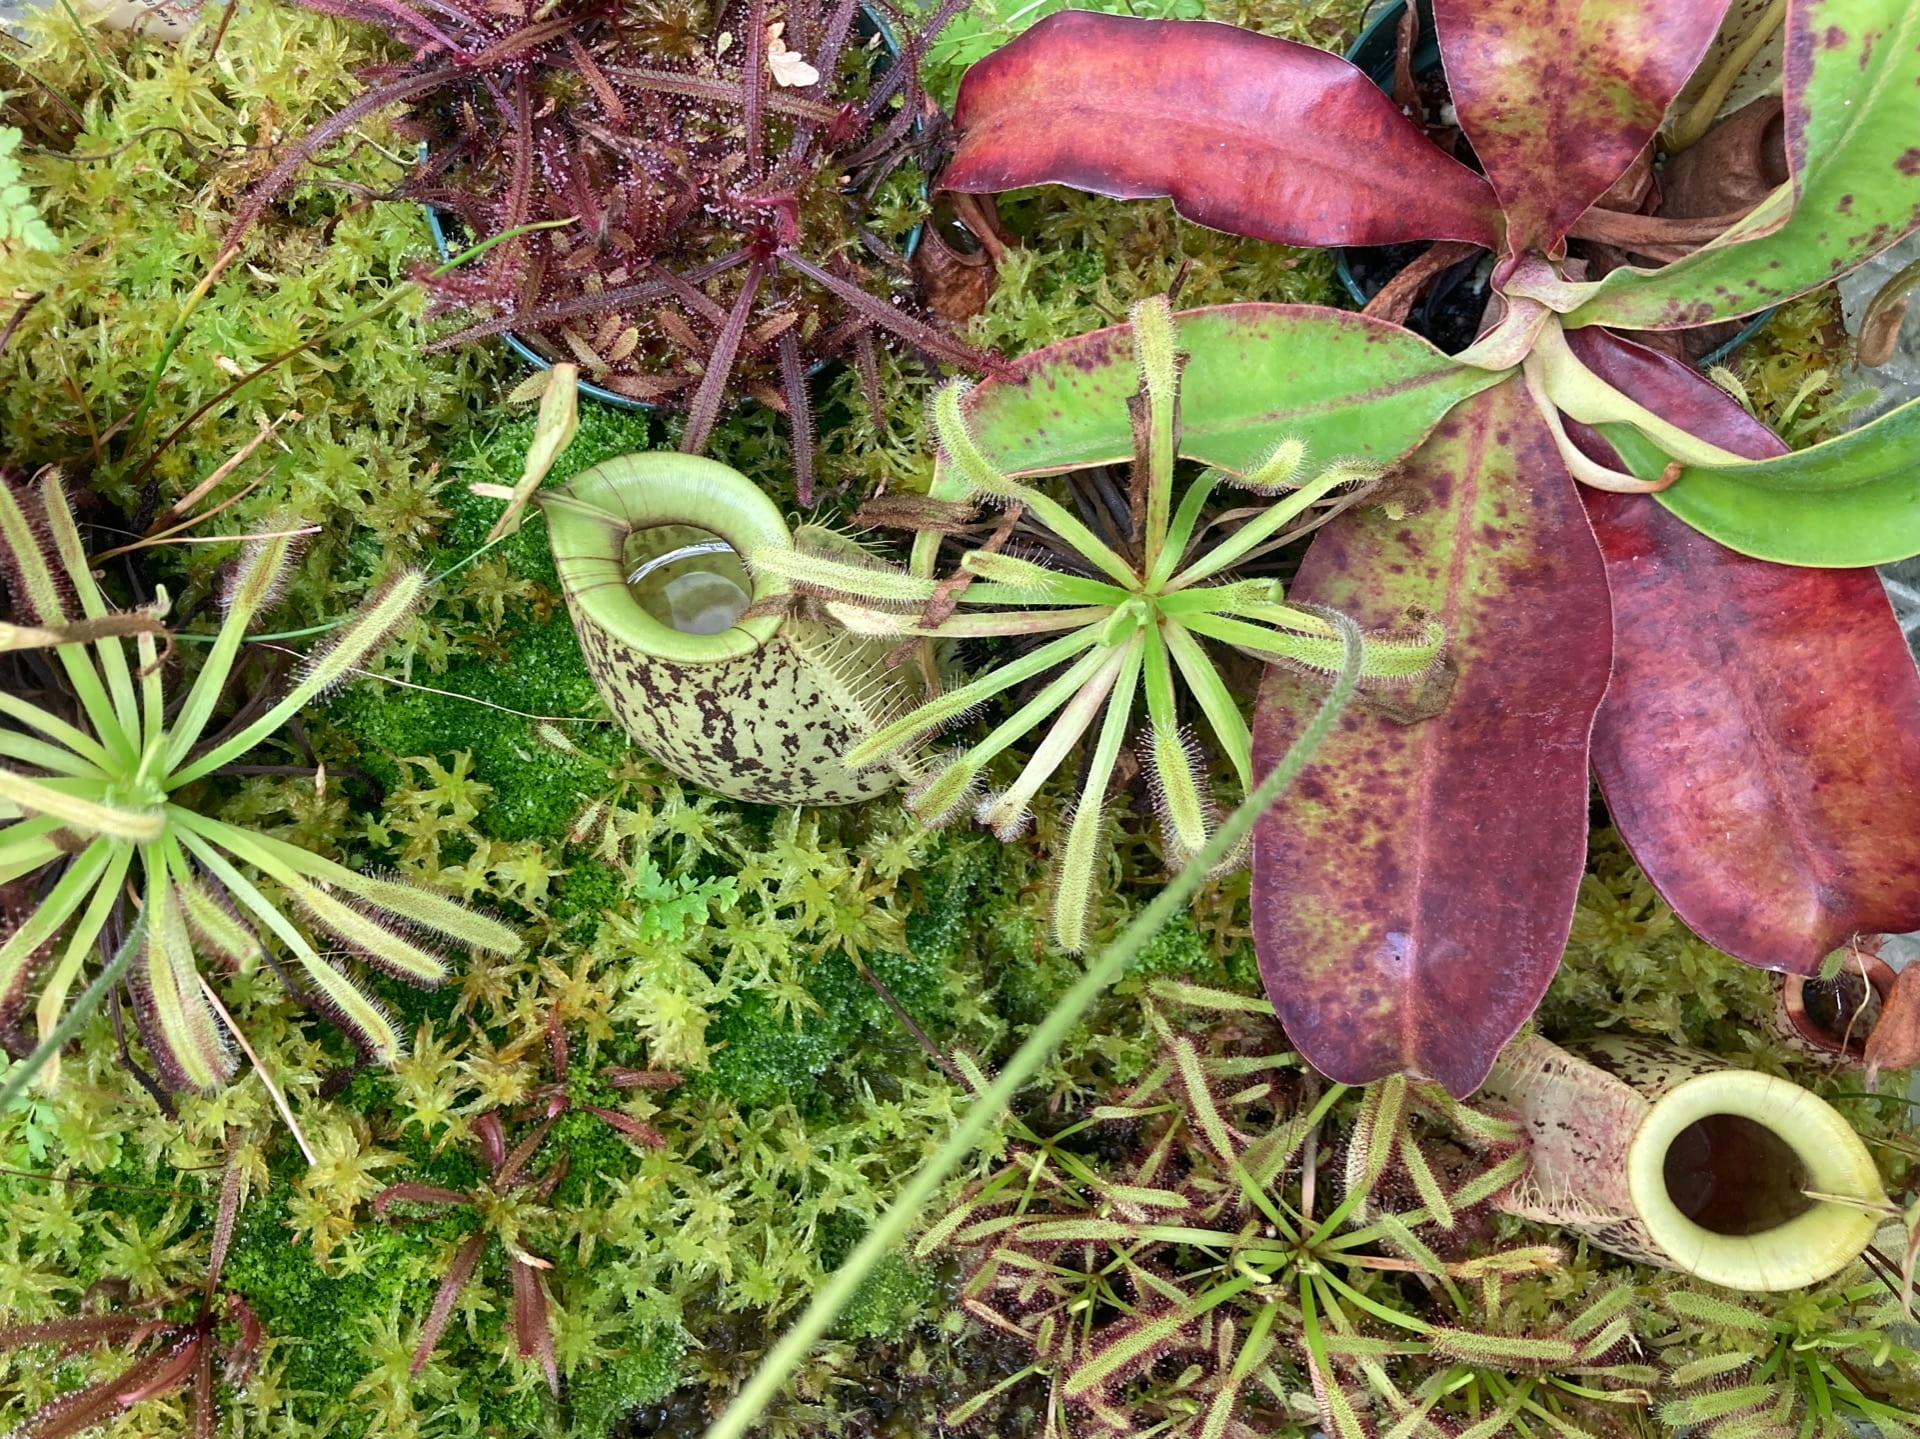 Our terrarium contains a variety of carnivorous plants including Nepenthes spp., Pinguecula spp., and Drosera spp..